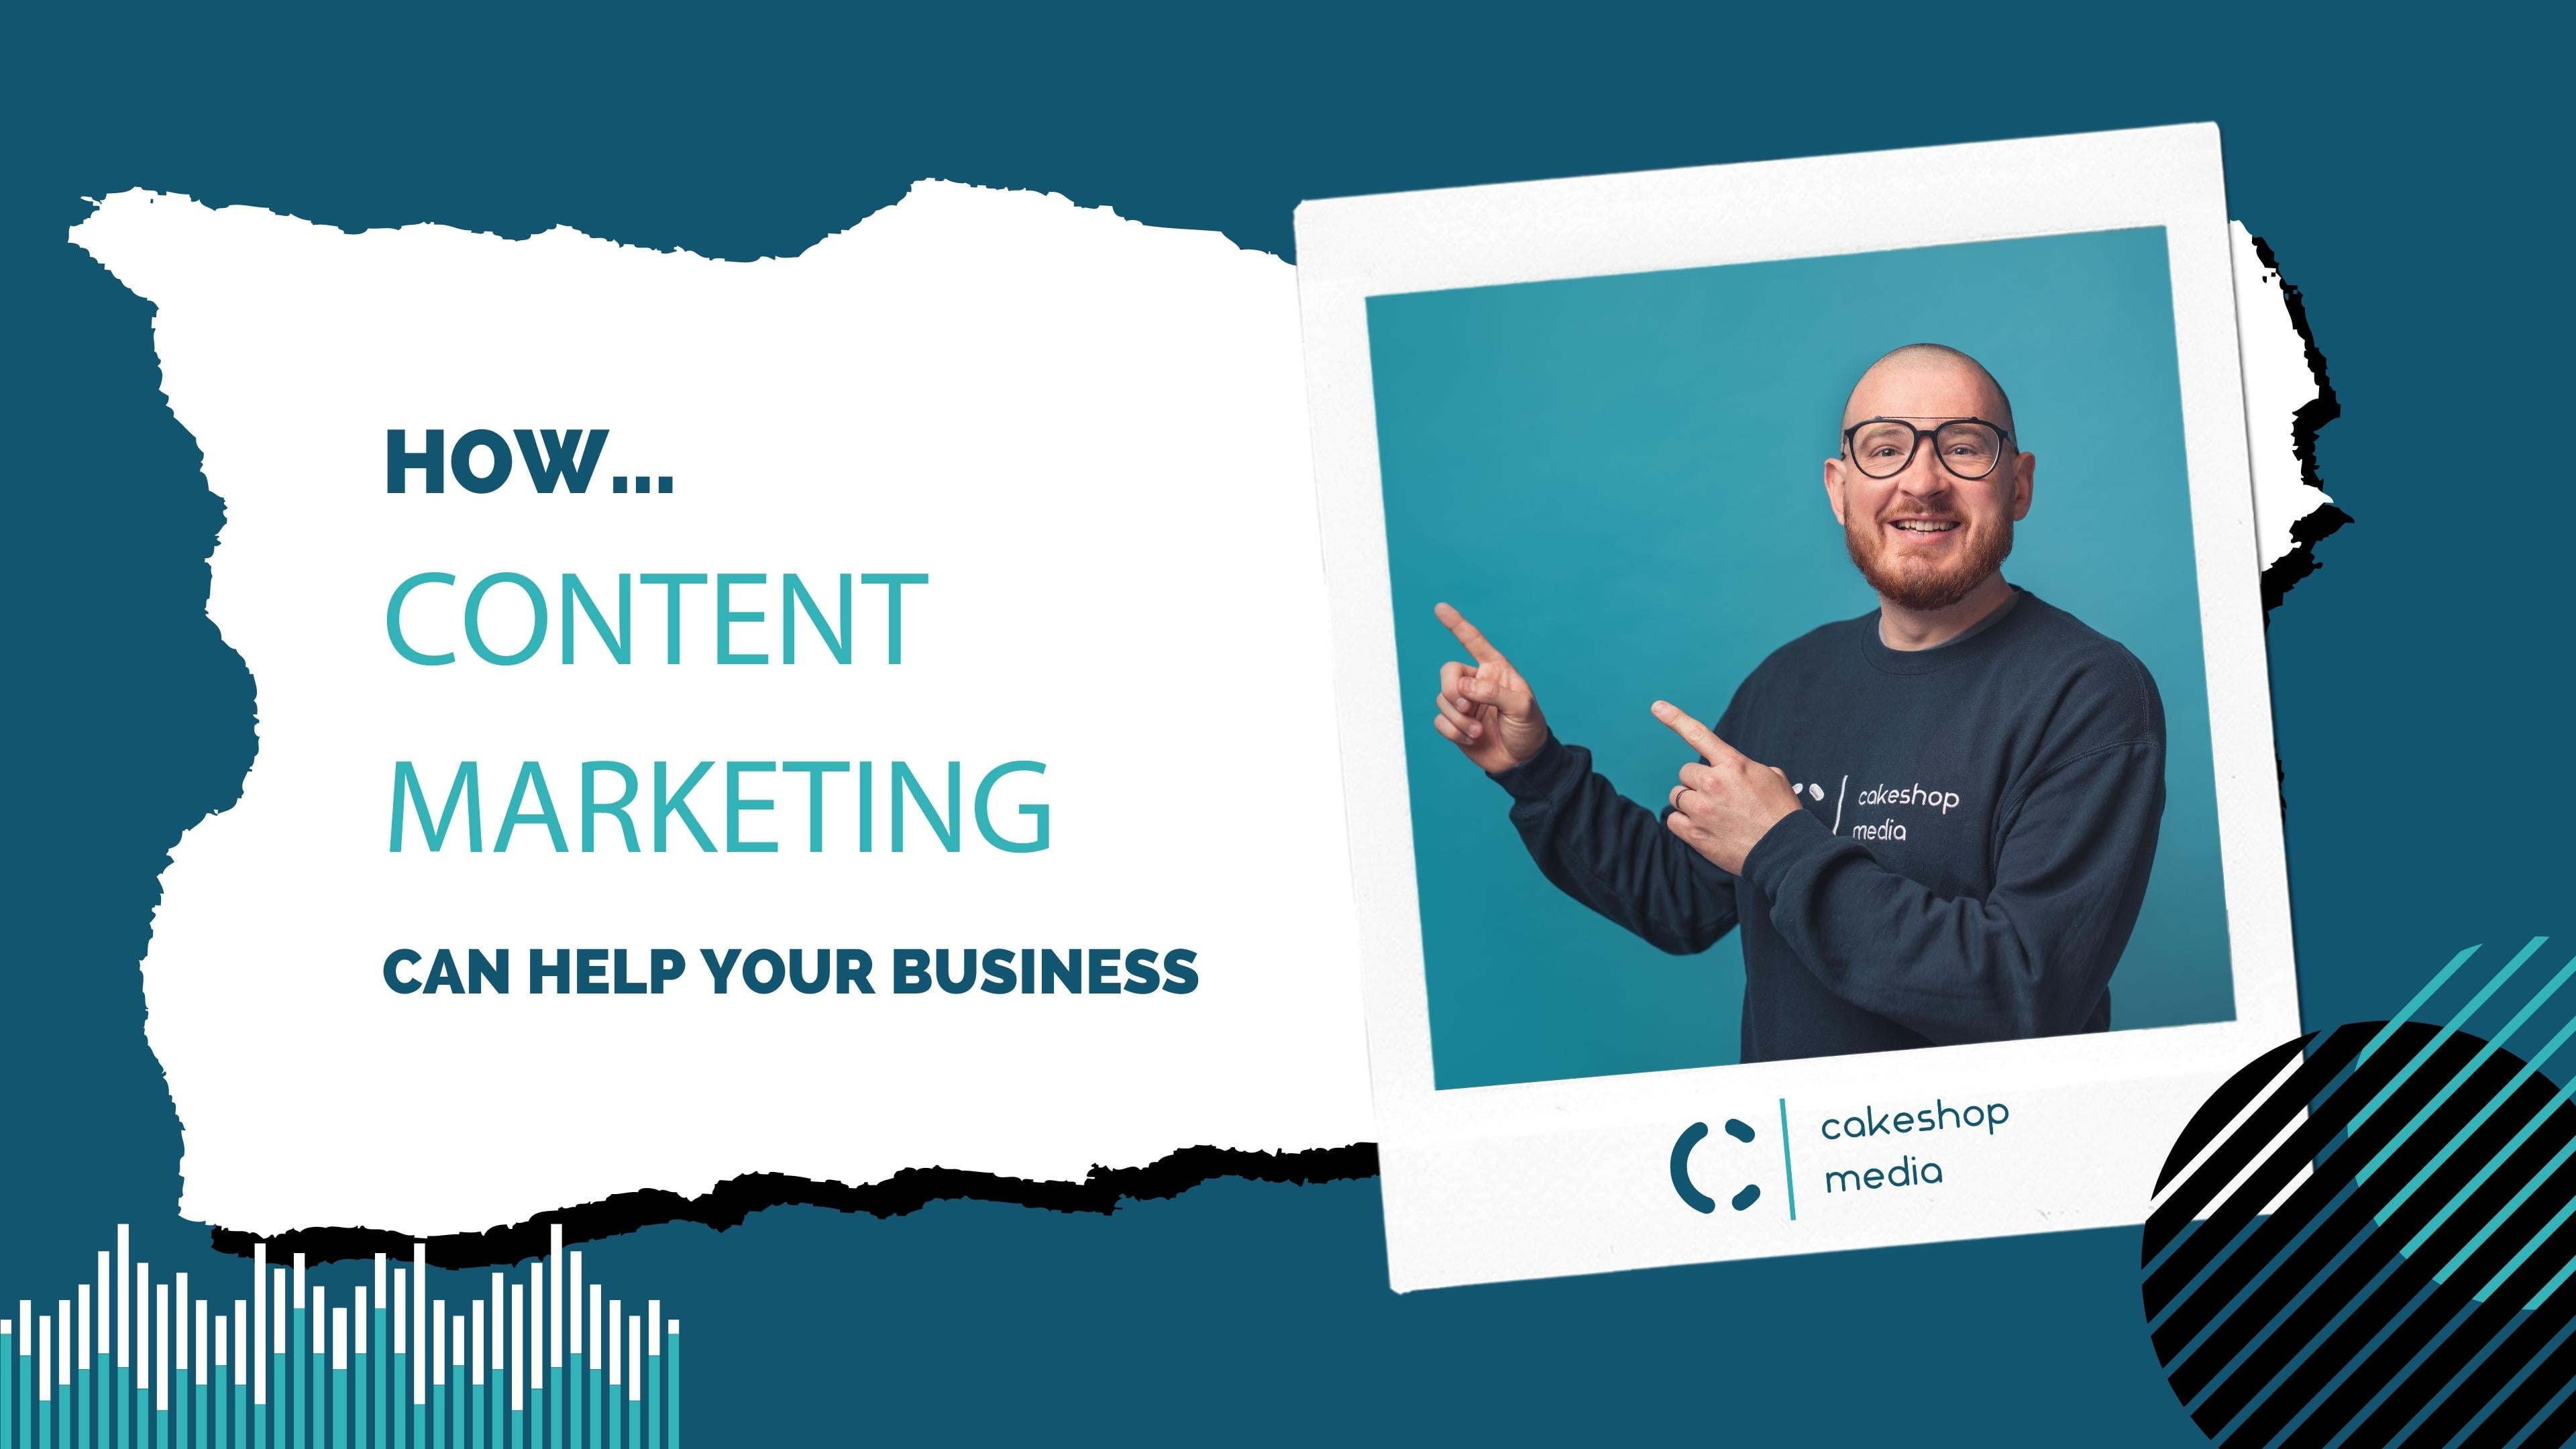 Cakeshop Media Digital Marketing Dover Kent How Can Content Marketing Help A Business?